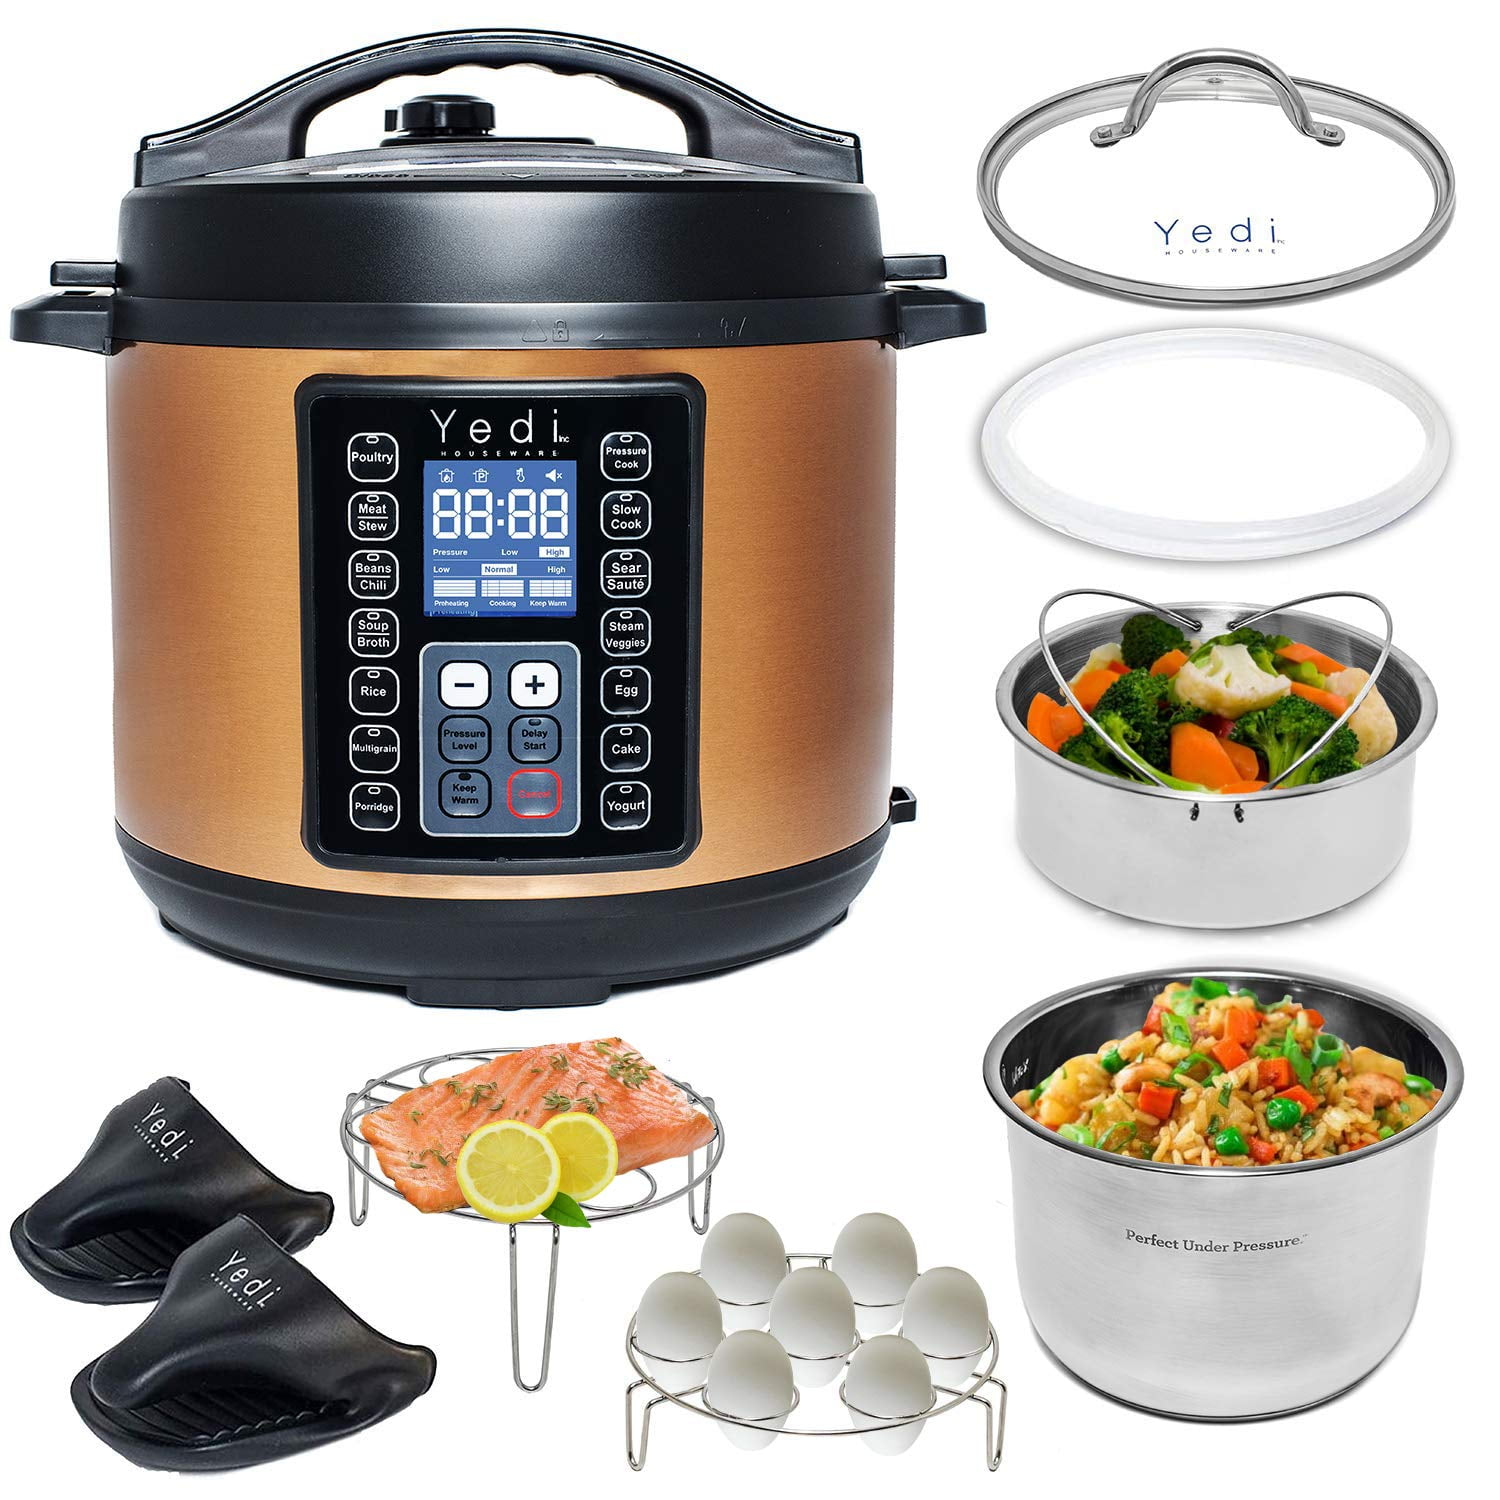 Yedi 9-in-1 Total Package Instant Programmable Pressure Cooker, 6 Quart,  Deluxe Accessory kit, Recipes, Pressure Cook, Slow Cook, Rice Cooker,  Yogurt